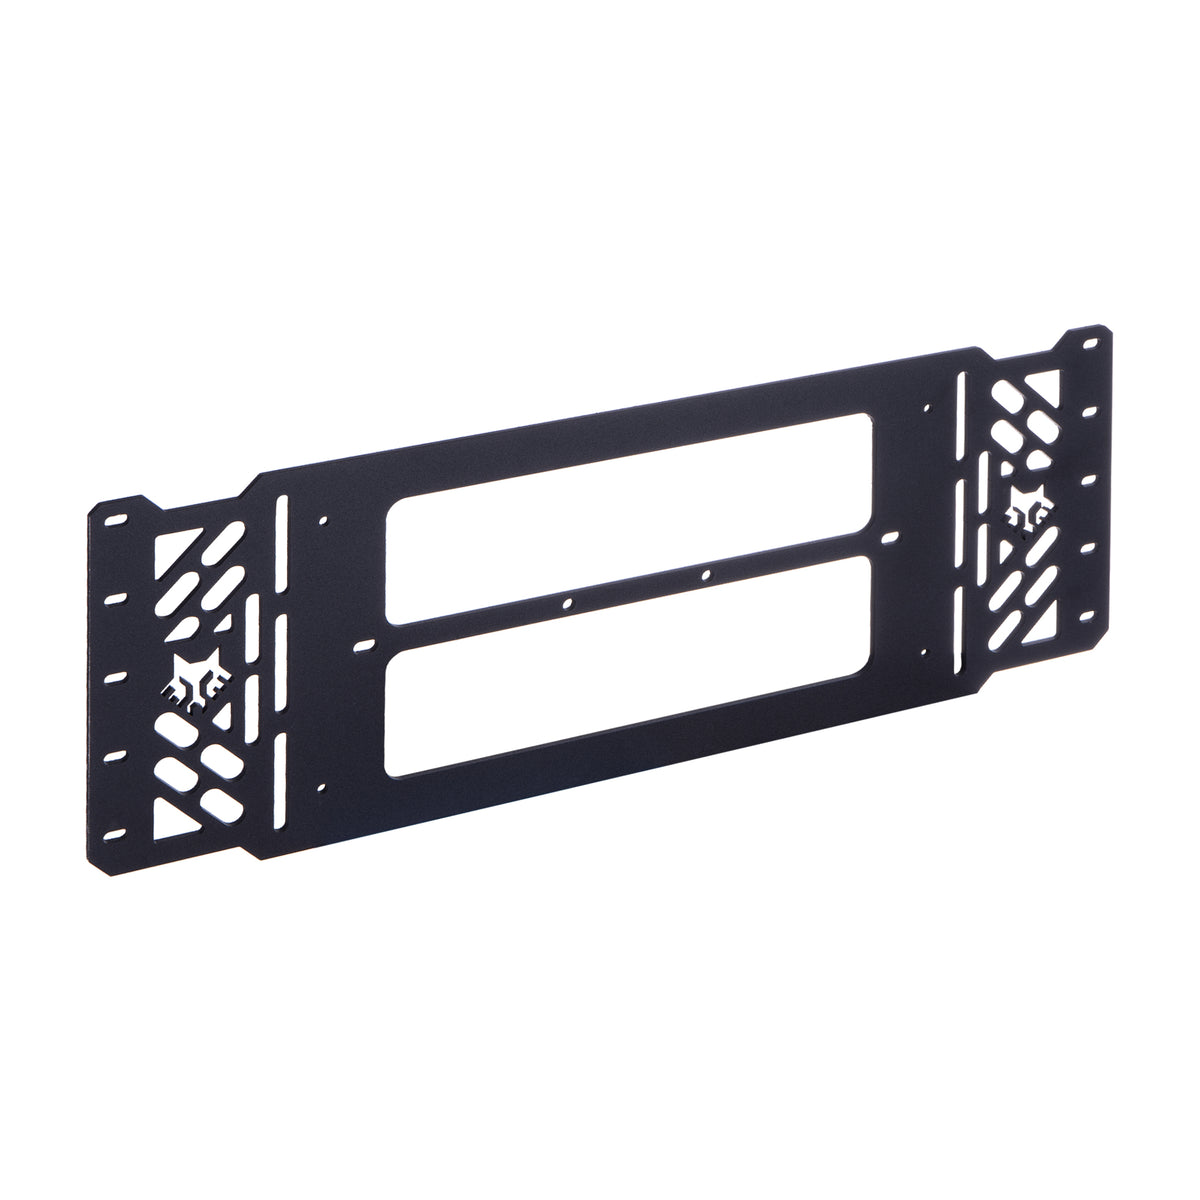 Alpha Adapt Milwaukee Compact Packout Mounting Plate